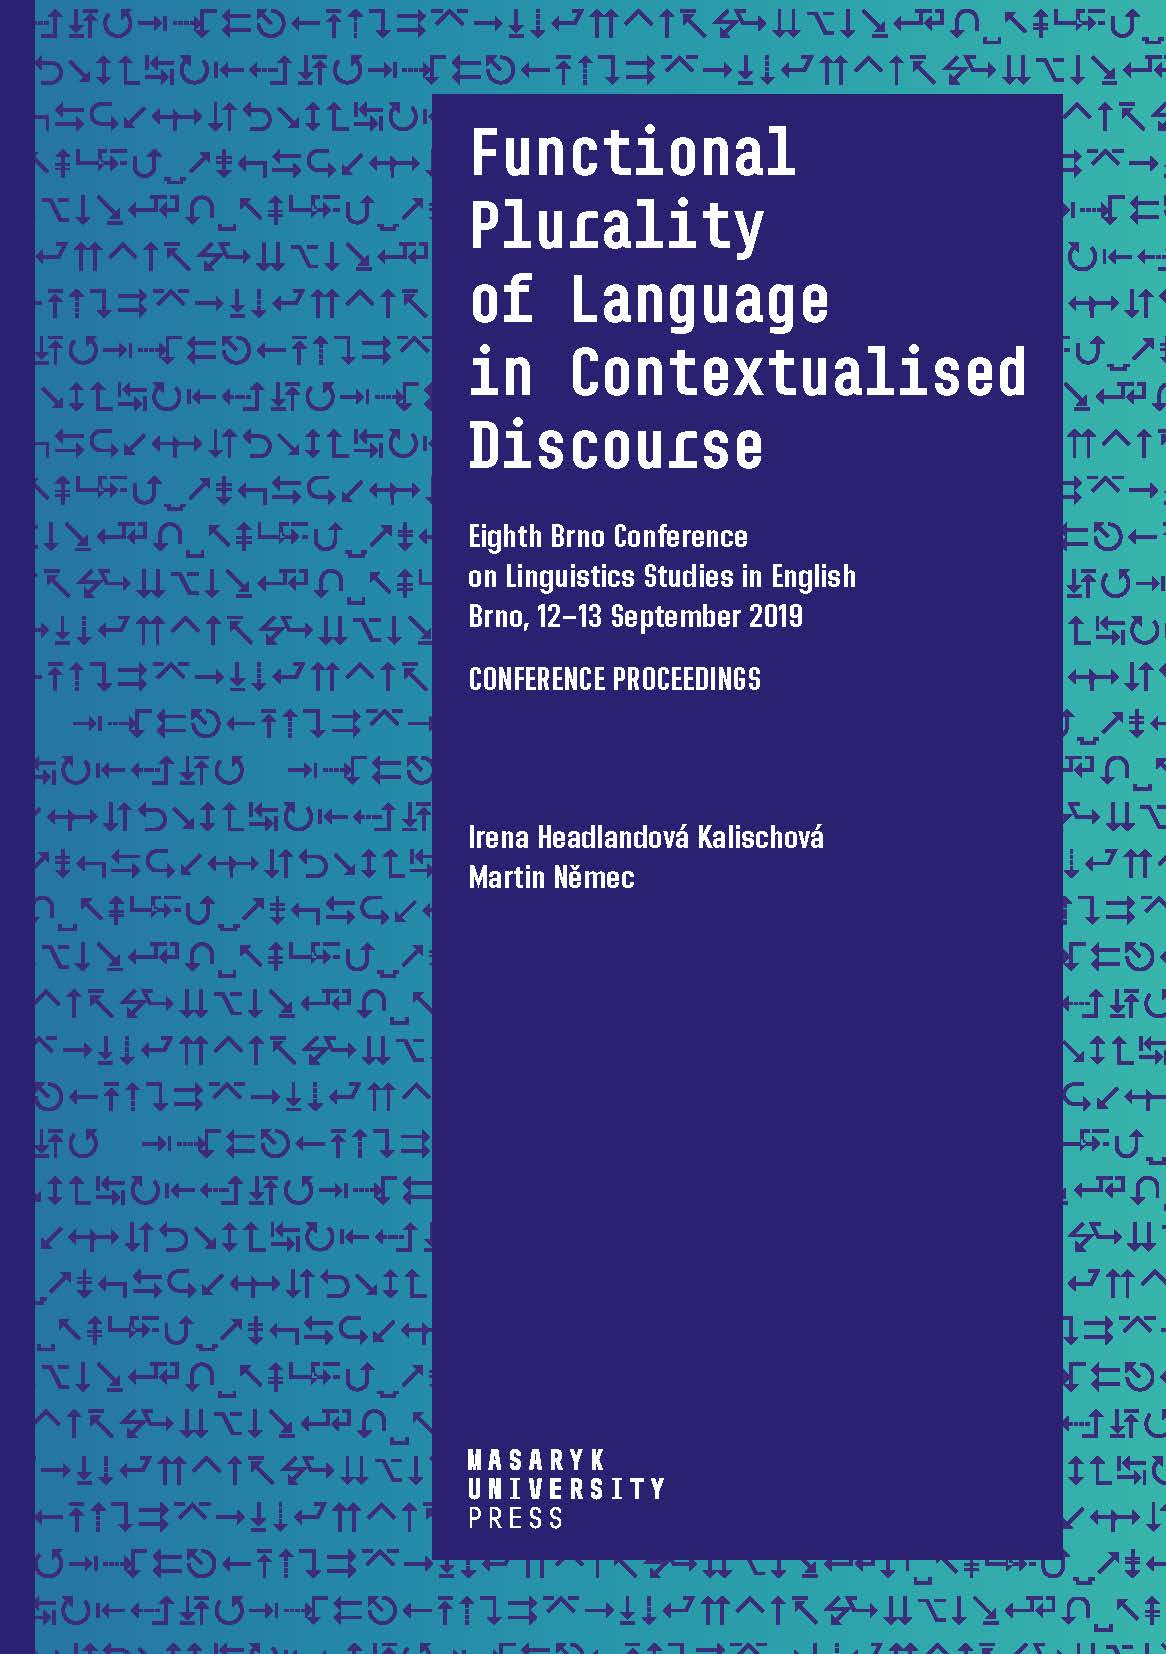 Obálka pro Functional Plurality of Language in Contextualised Discourse. Eighth Brno Conference on Linguistics Studies in English. Conference Proceedings. Brno, 12–13 September 2019